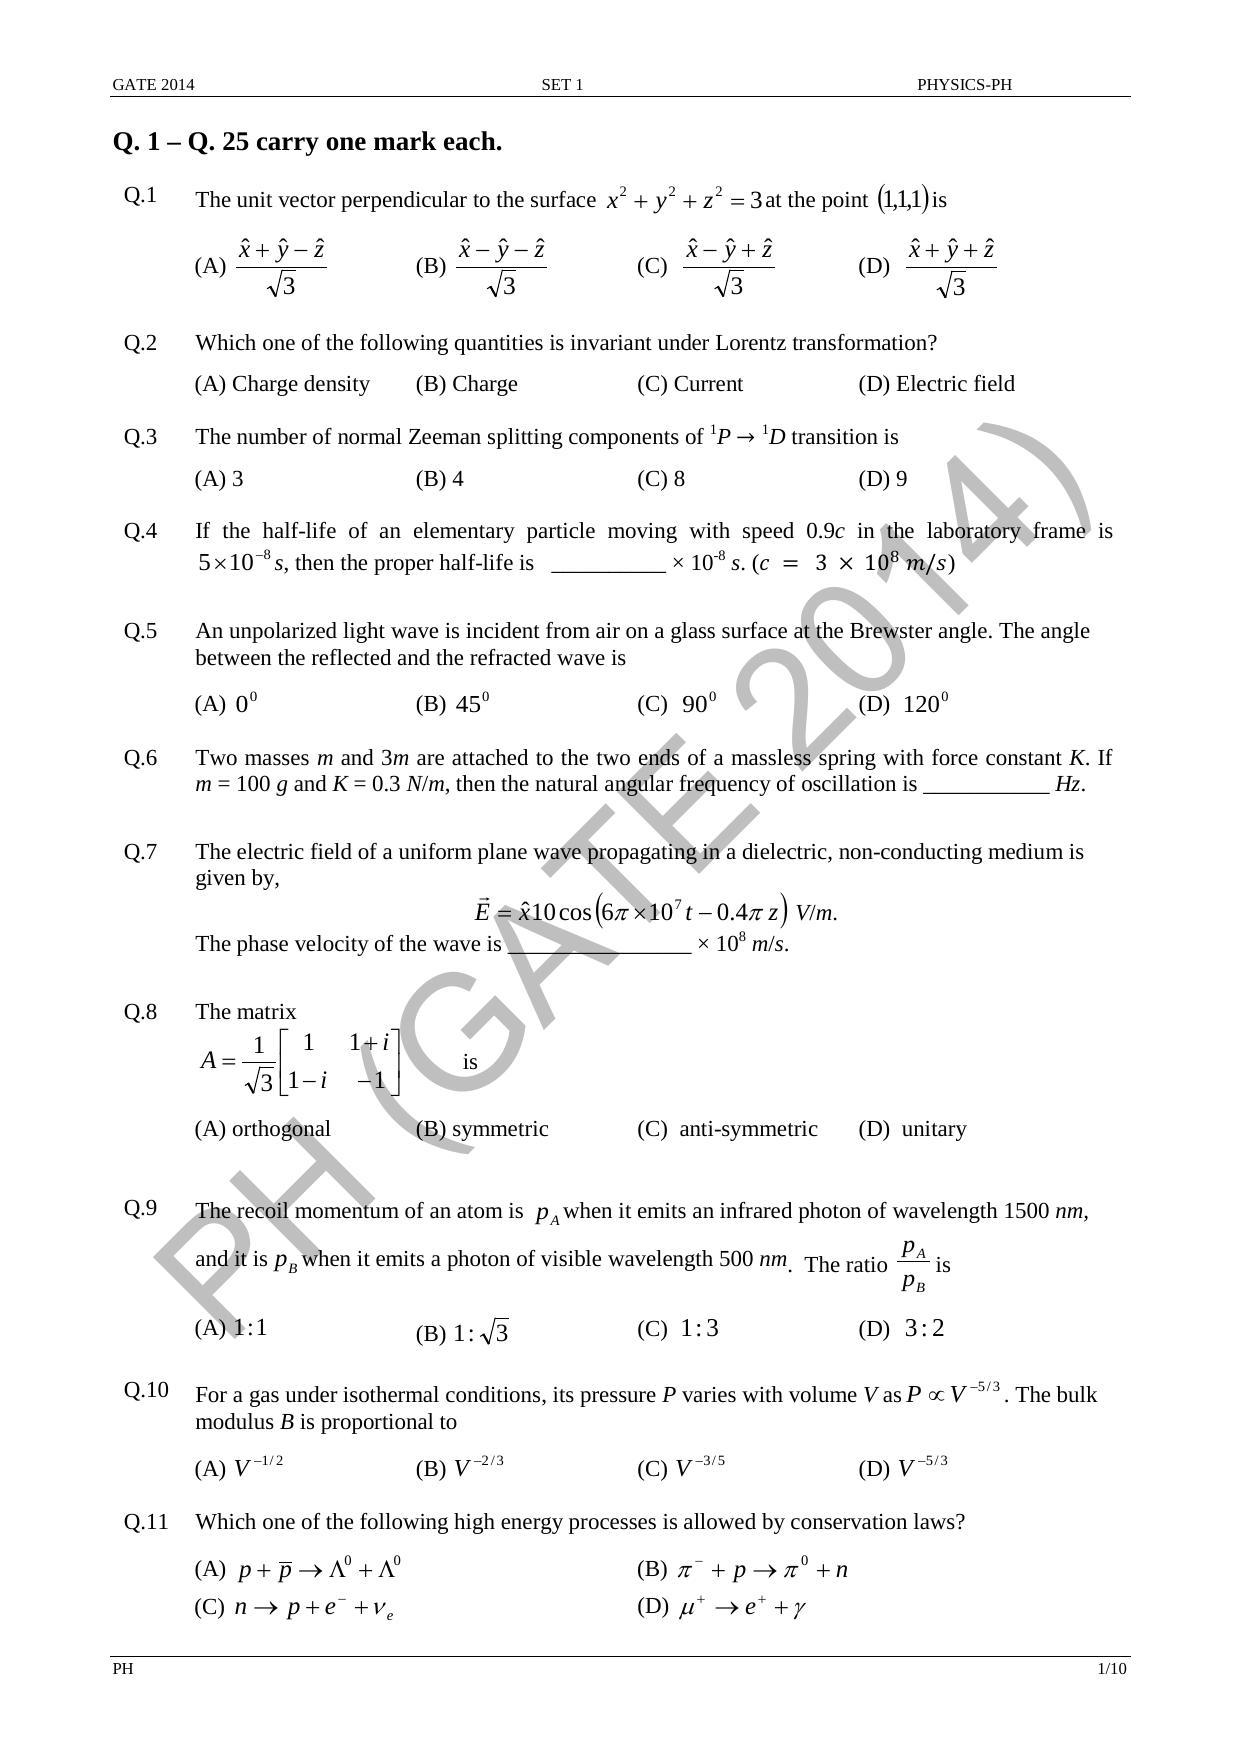 GATE 2014 Physics (PH) Question Paper with Answer Key - Page 8